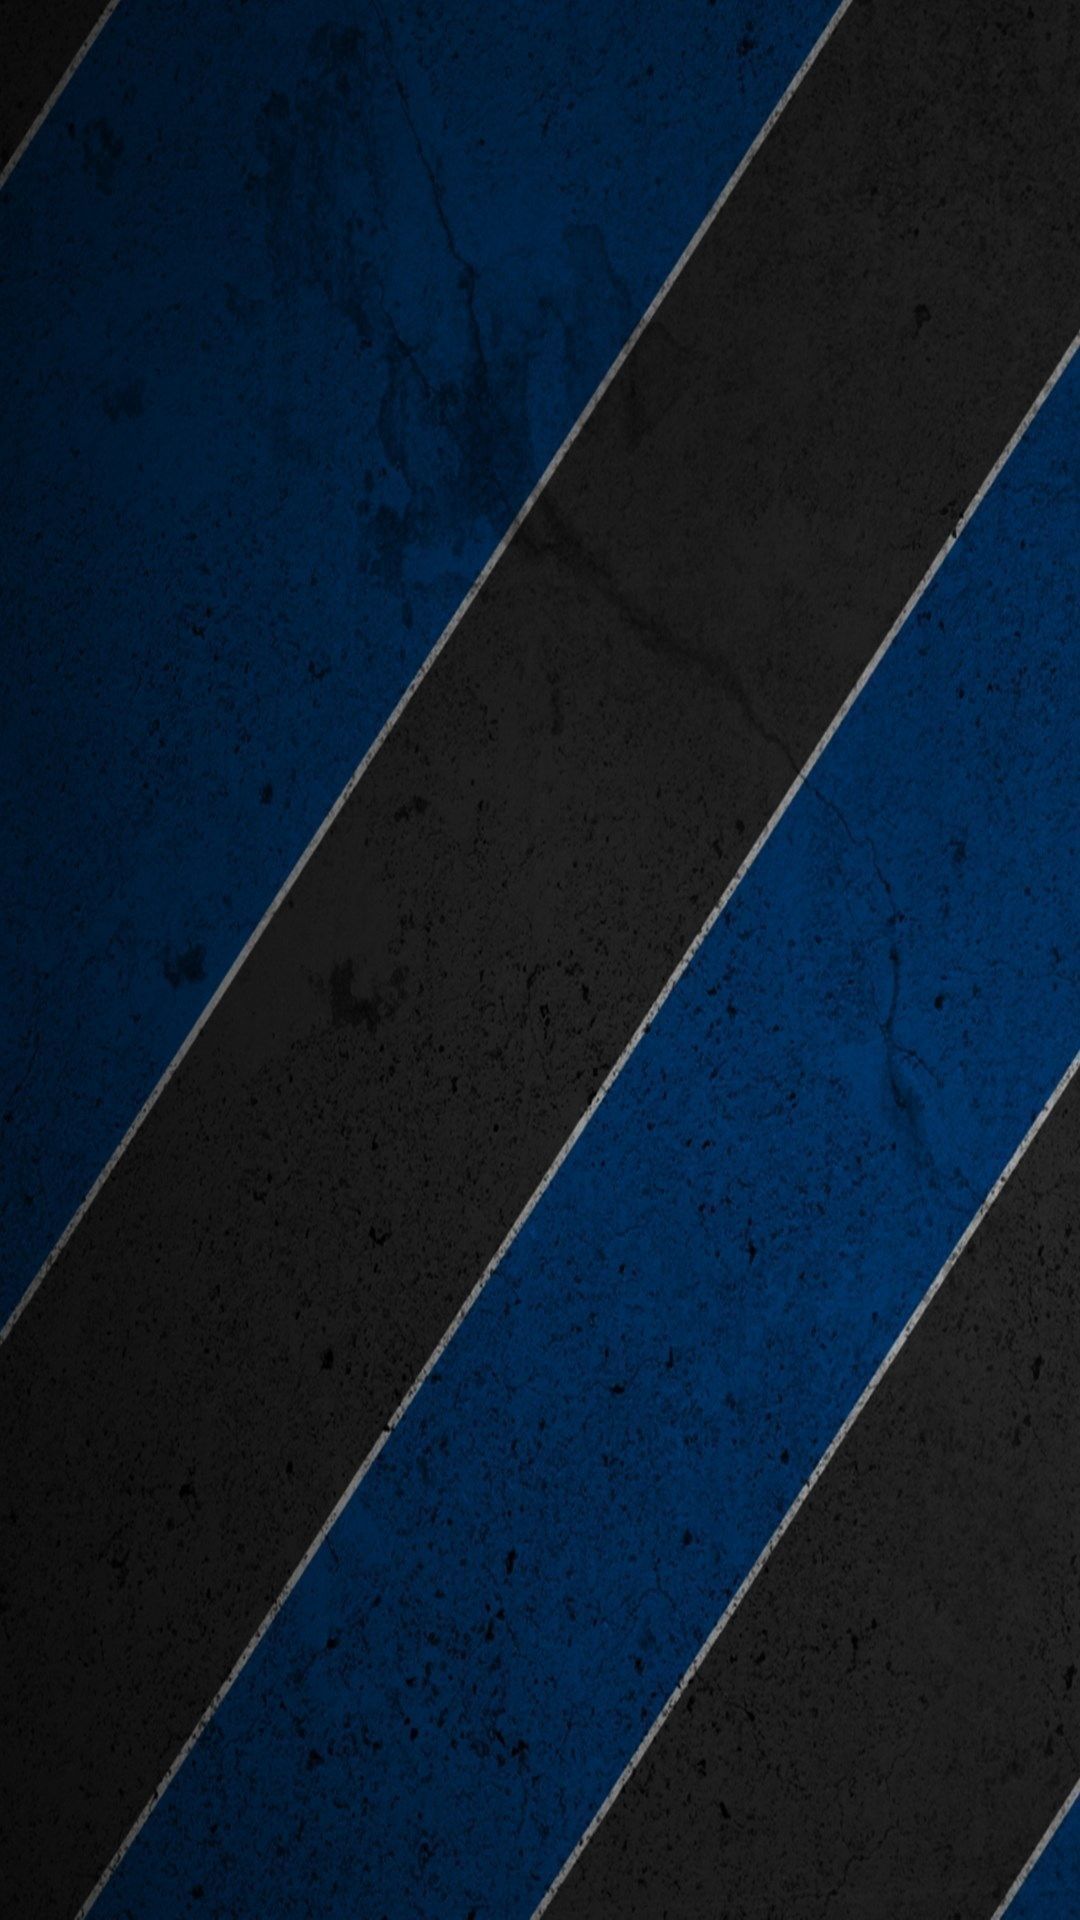 Black And Blue 4K Android Wallpapers - Wallpaper Cave